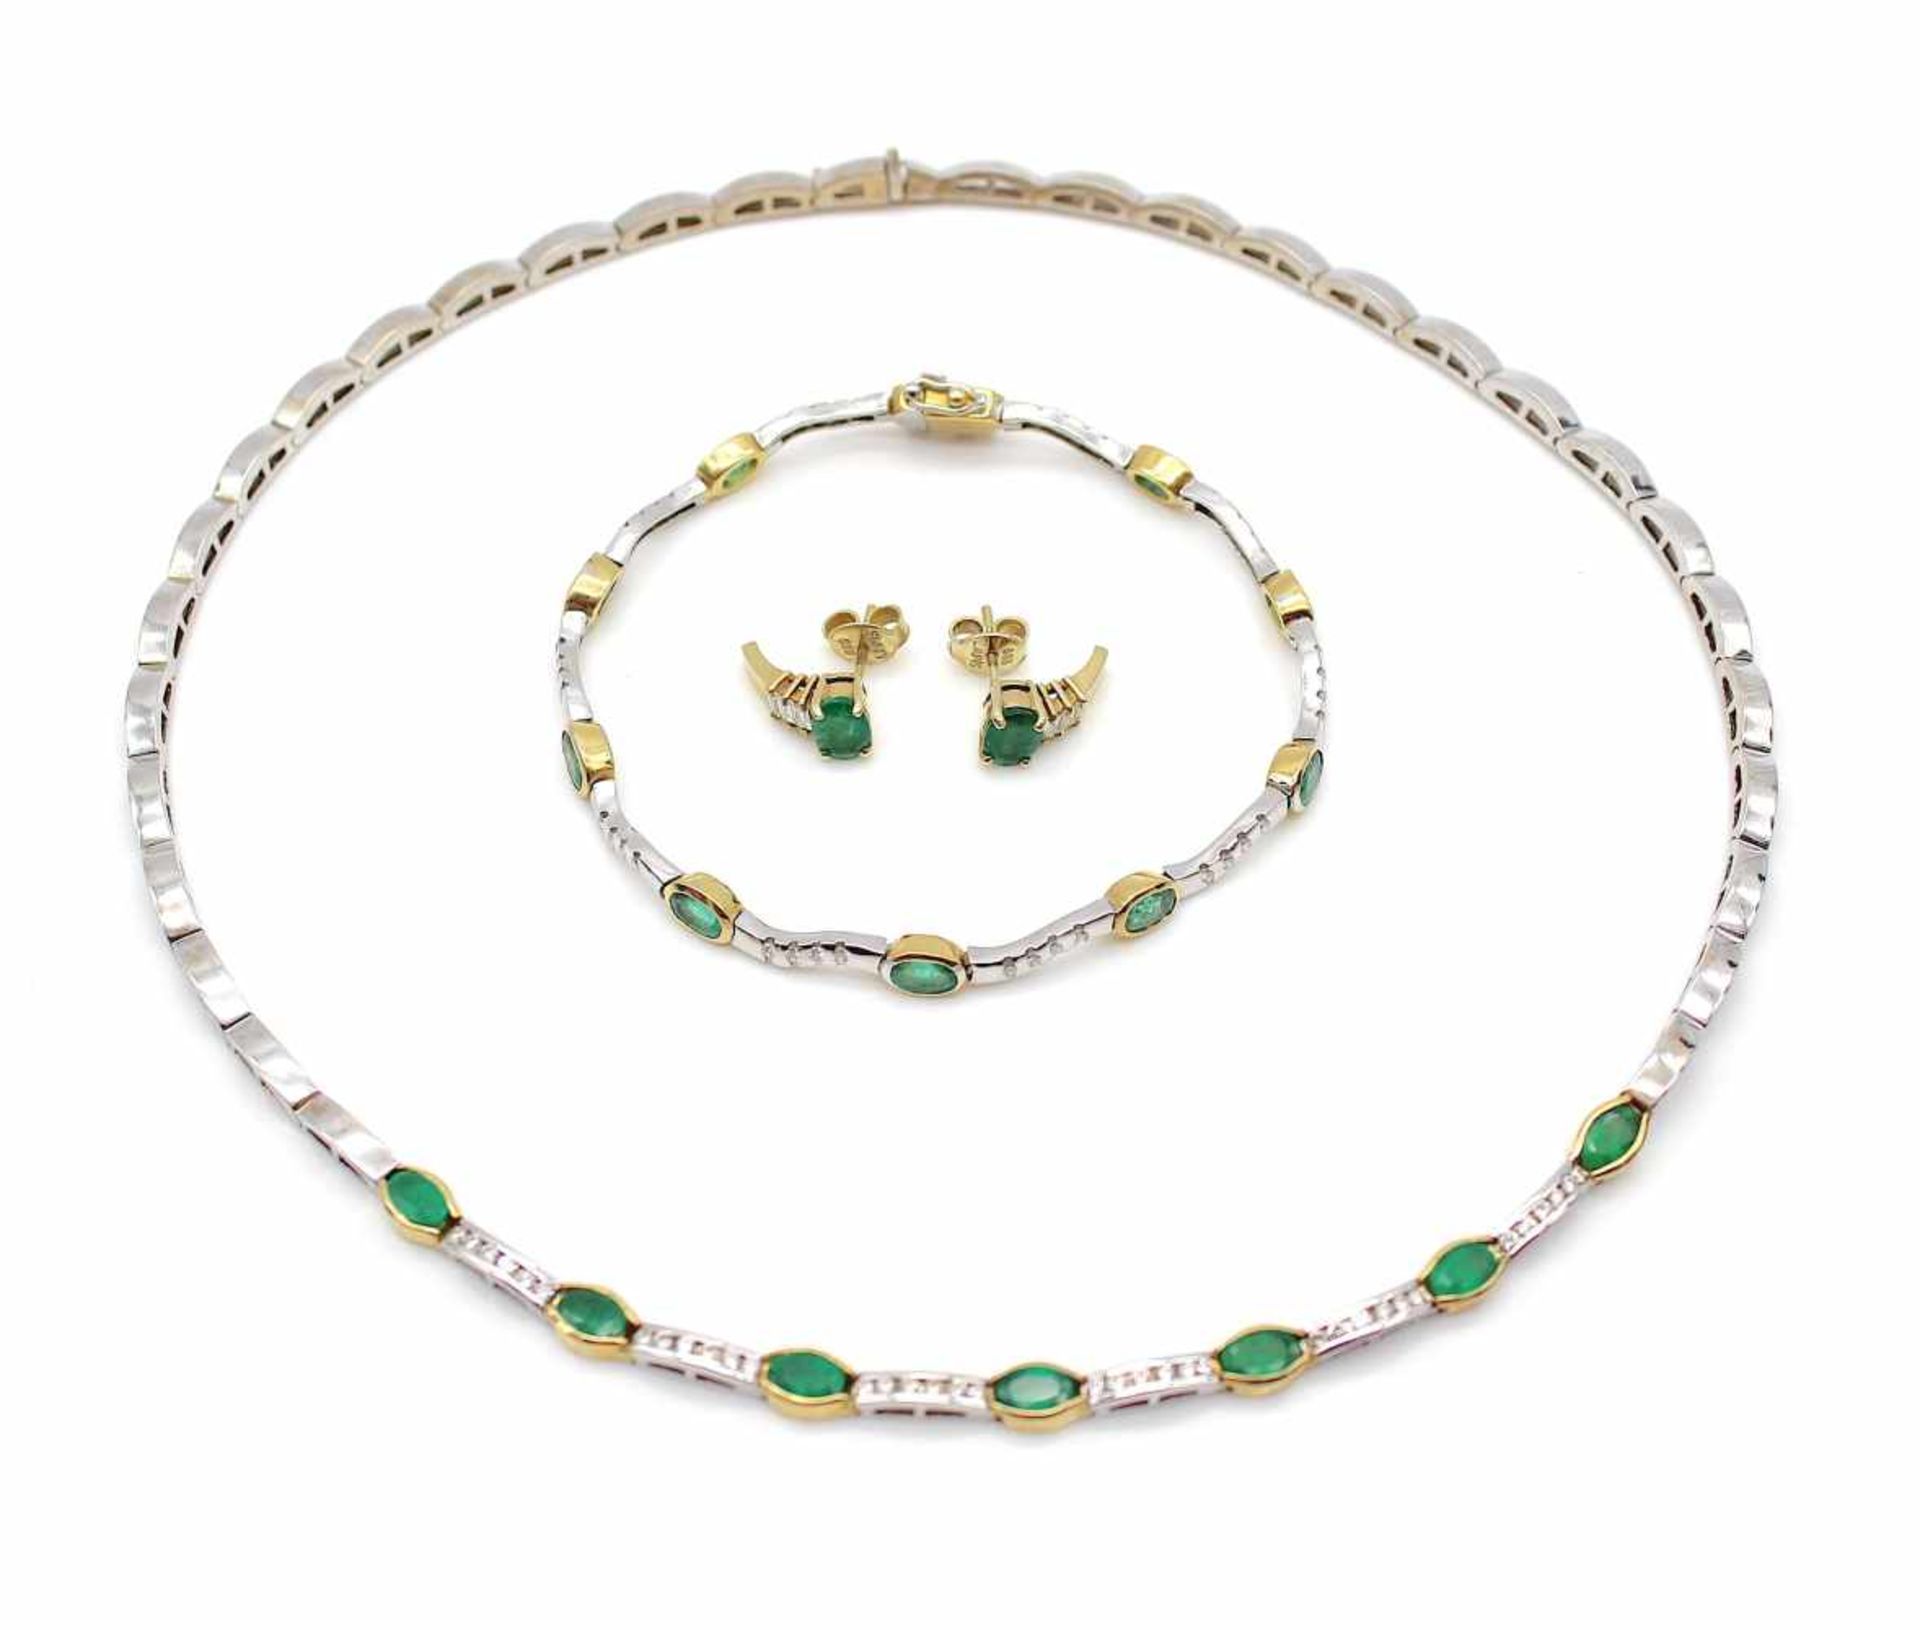 Jewellery set consisting of necklace, bracelet and earrings. Material 750 white and yellow gold with